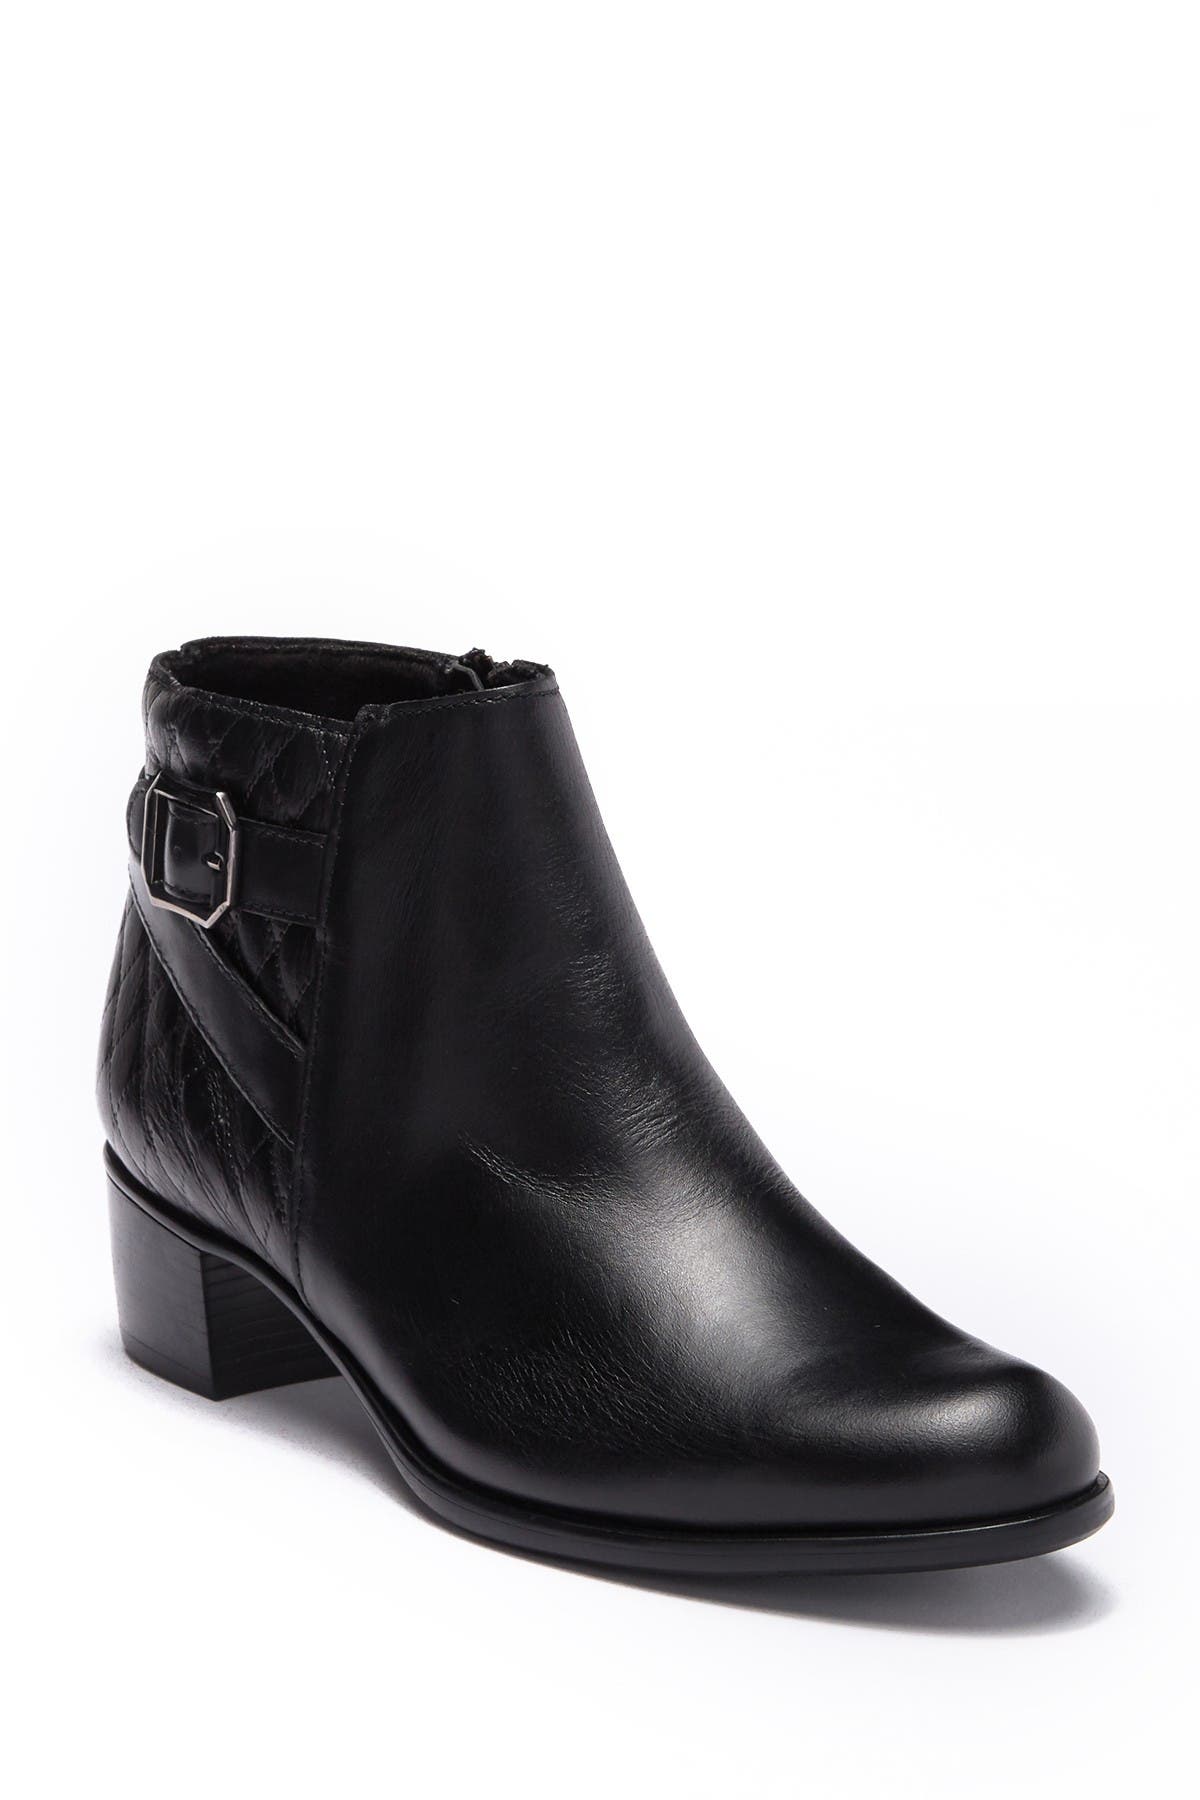 munro boots nordstrom